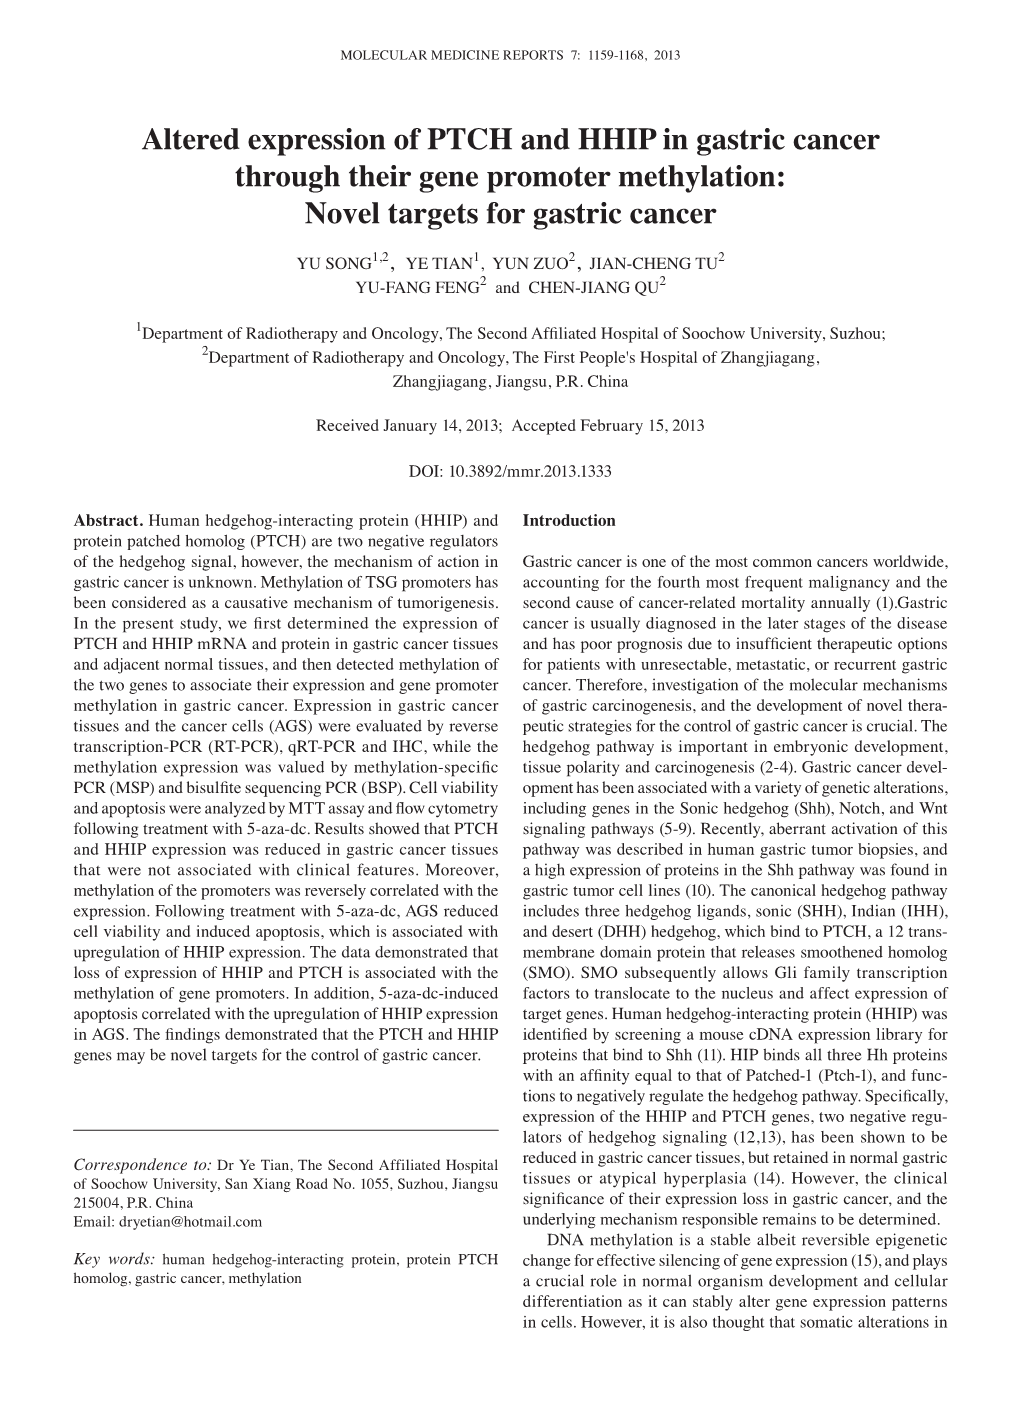 Altered Expression of PTCH and HHIP in Gastric Cancer Through Their Gene Promoter Methylation: Novel Targets for Gastric Cancer